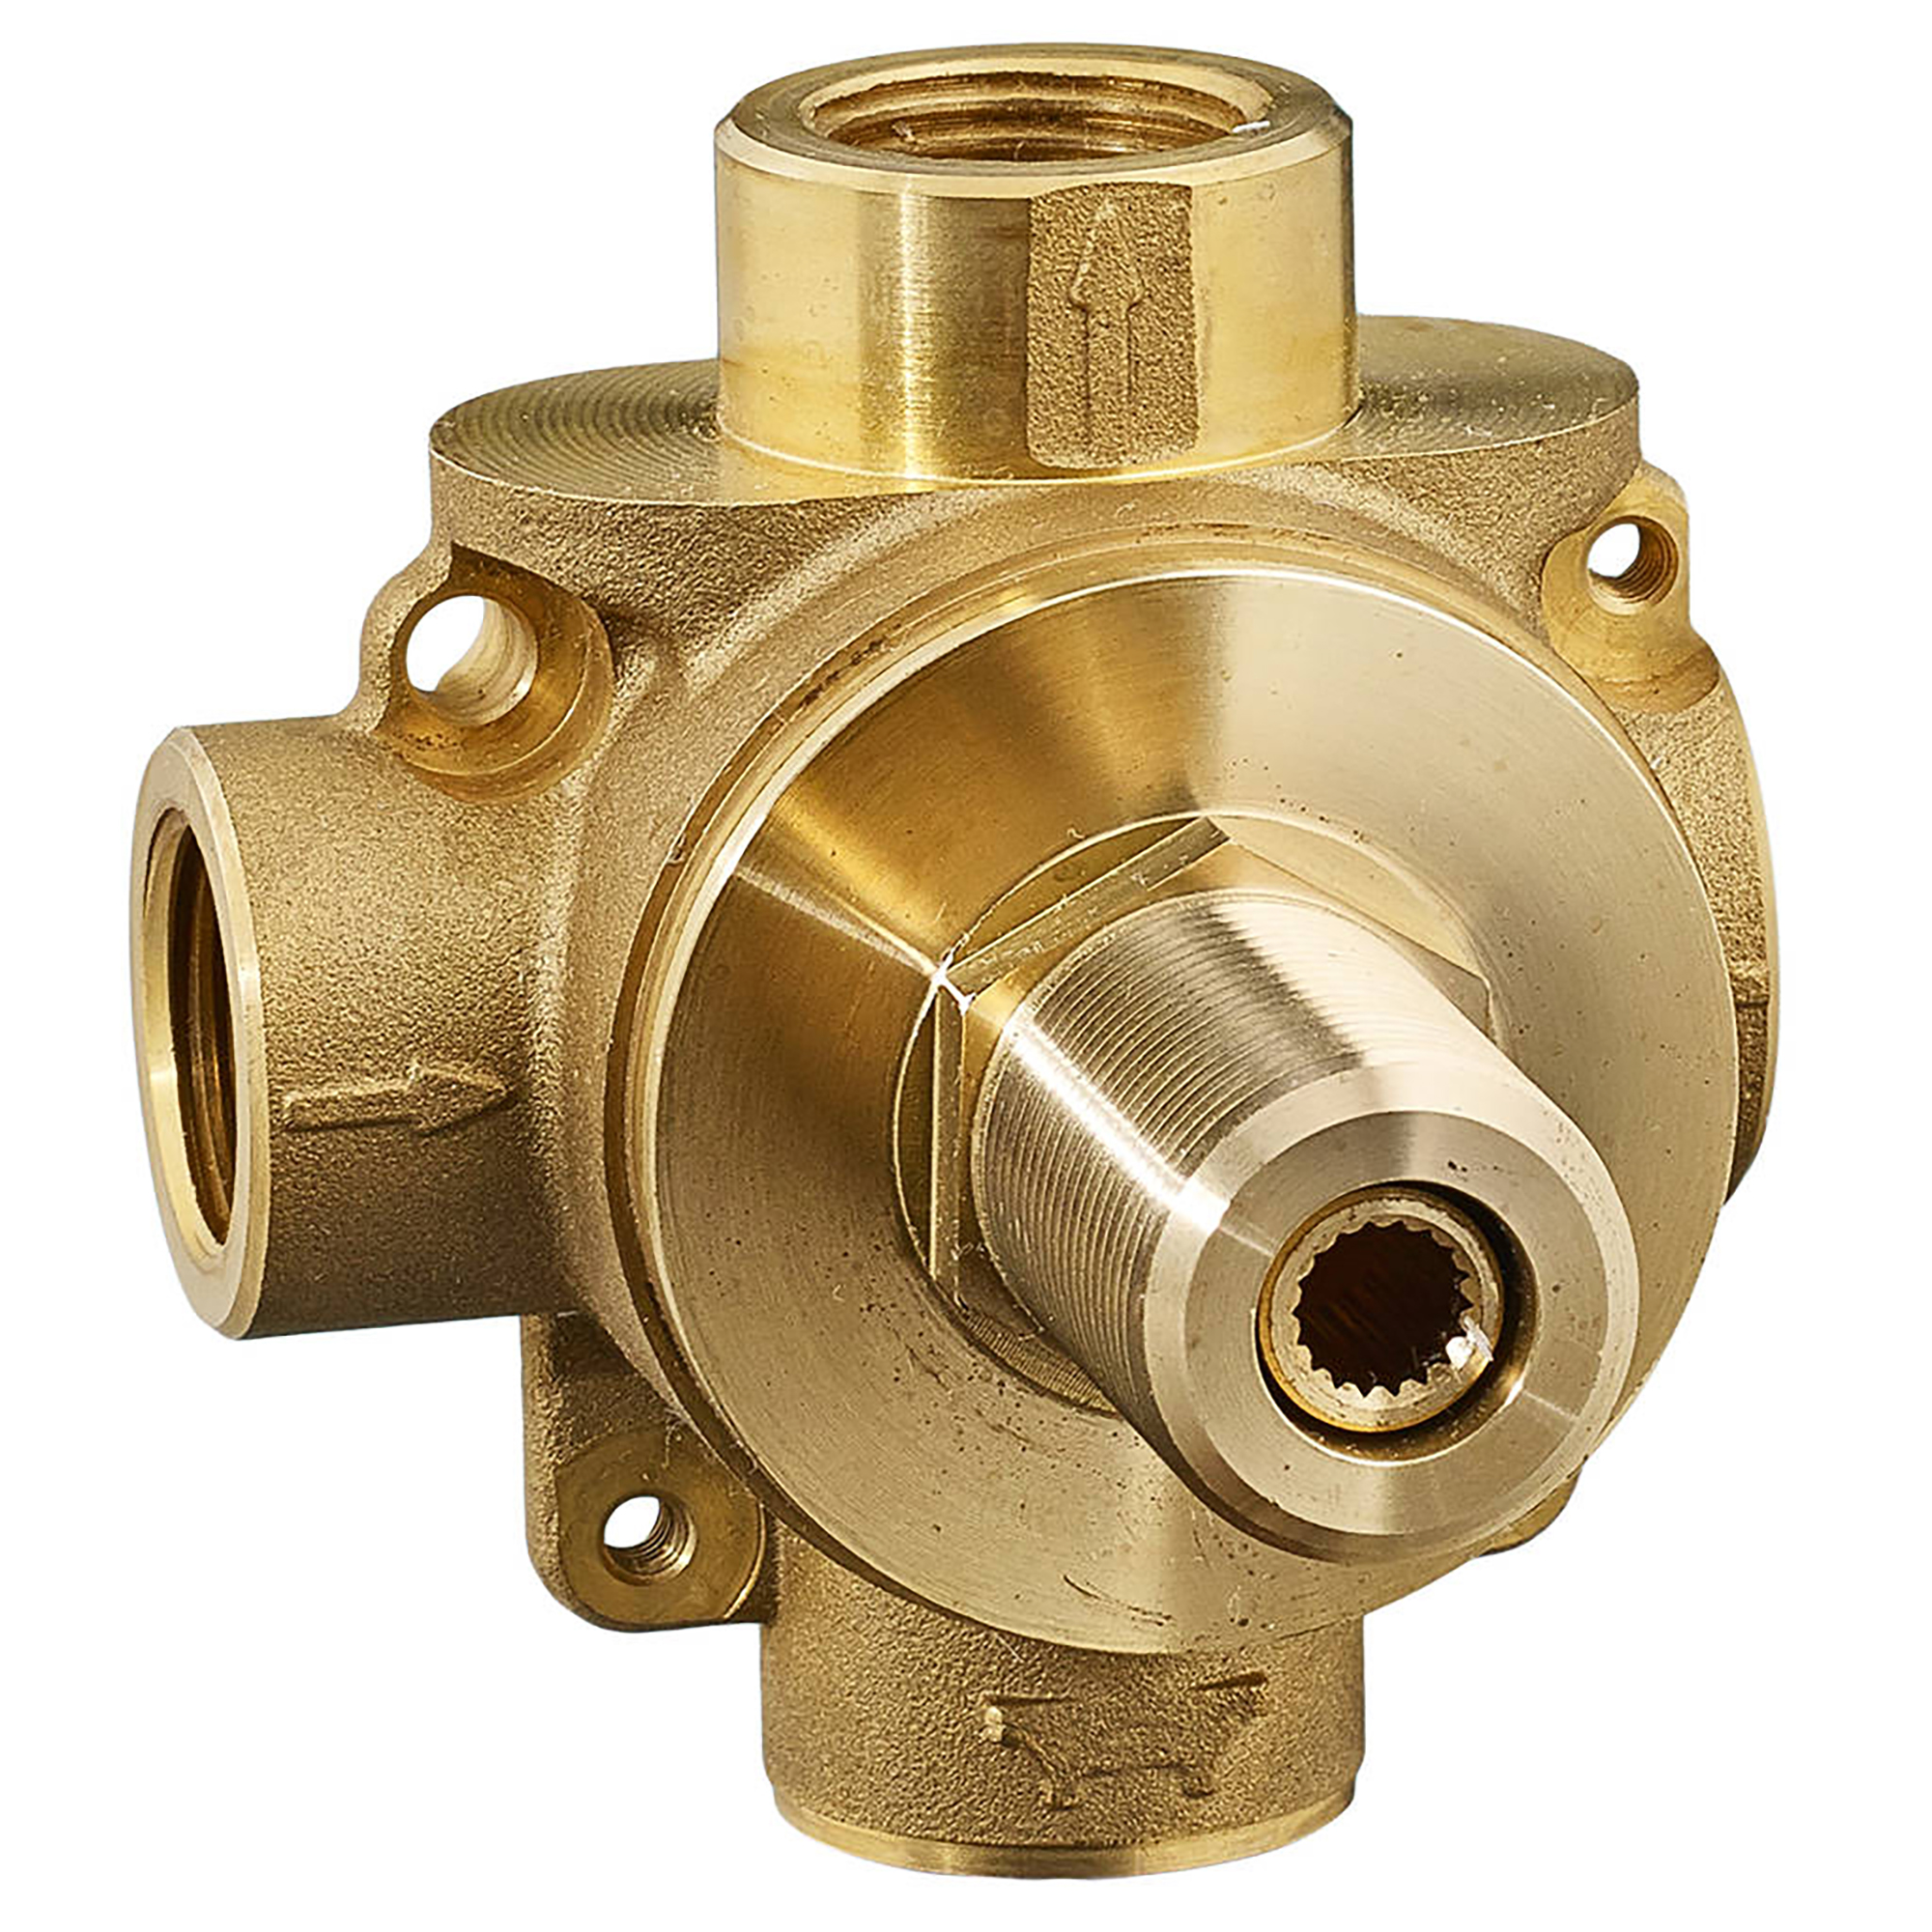 2-Way In-Wall Diverter Rough-In Valve With 2 Discrete Functions